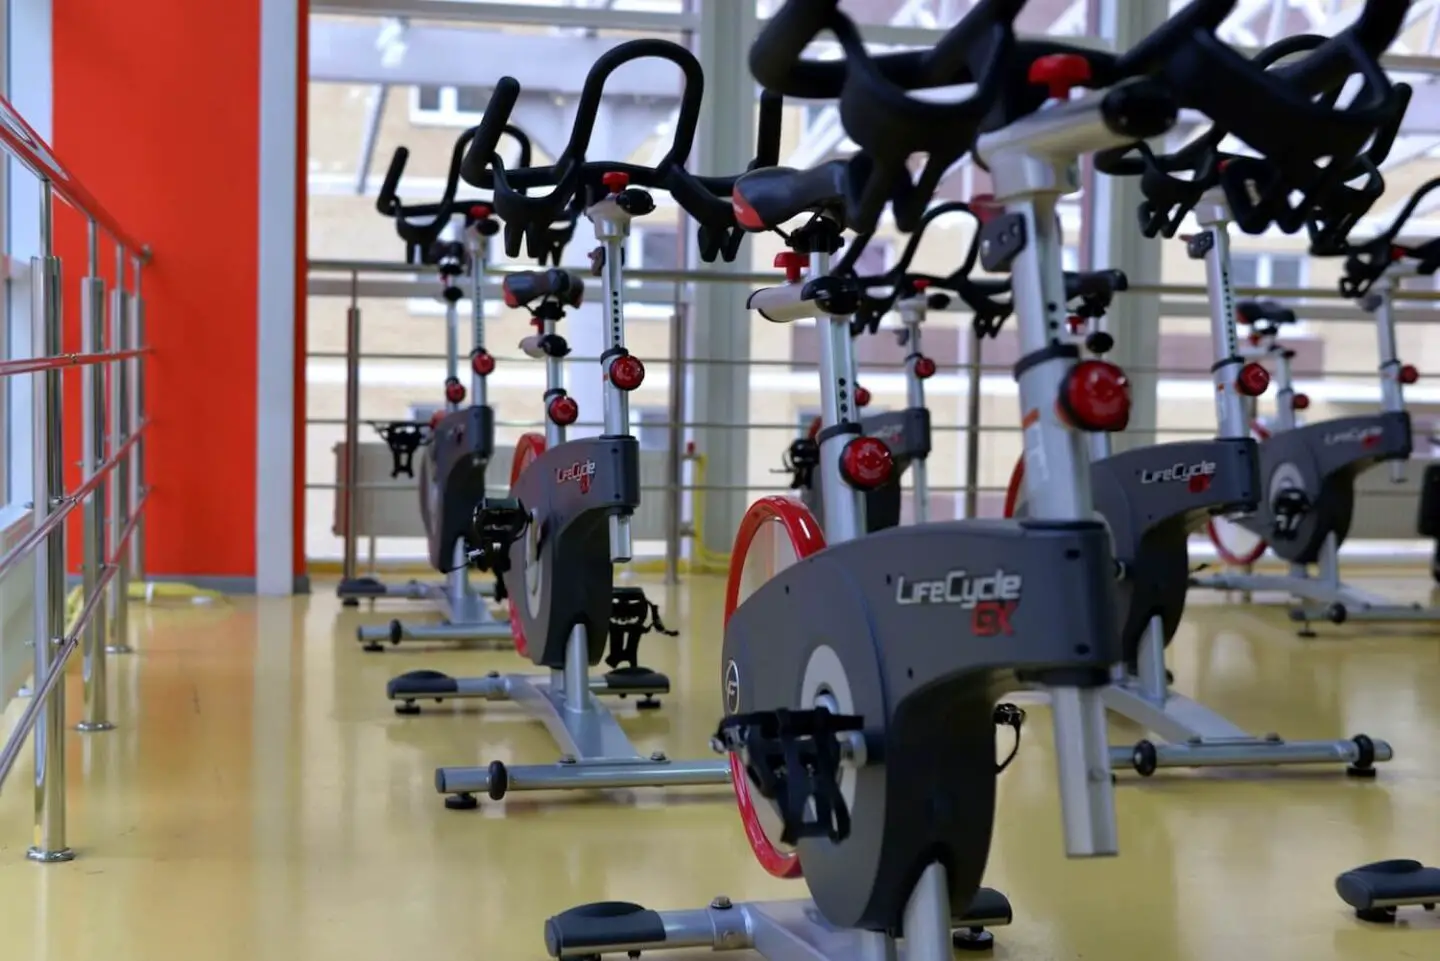 A room full of spin bikes in a gym